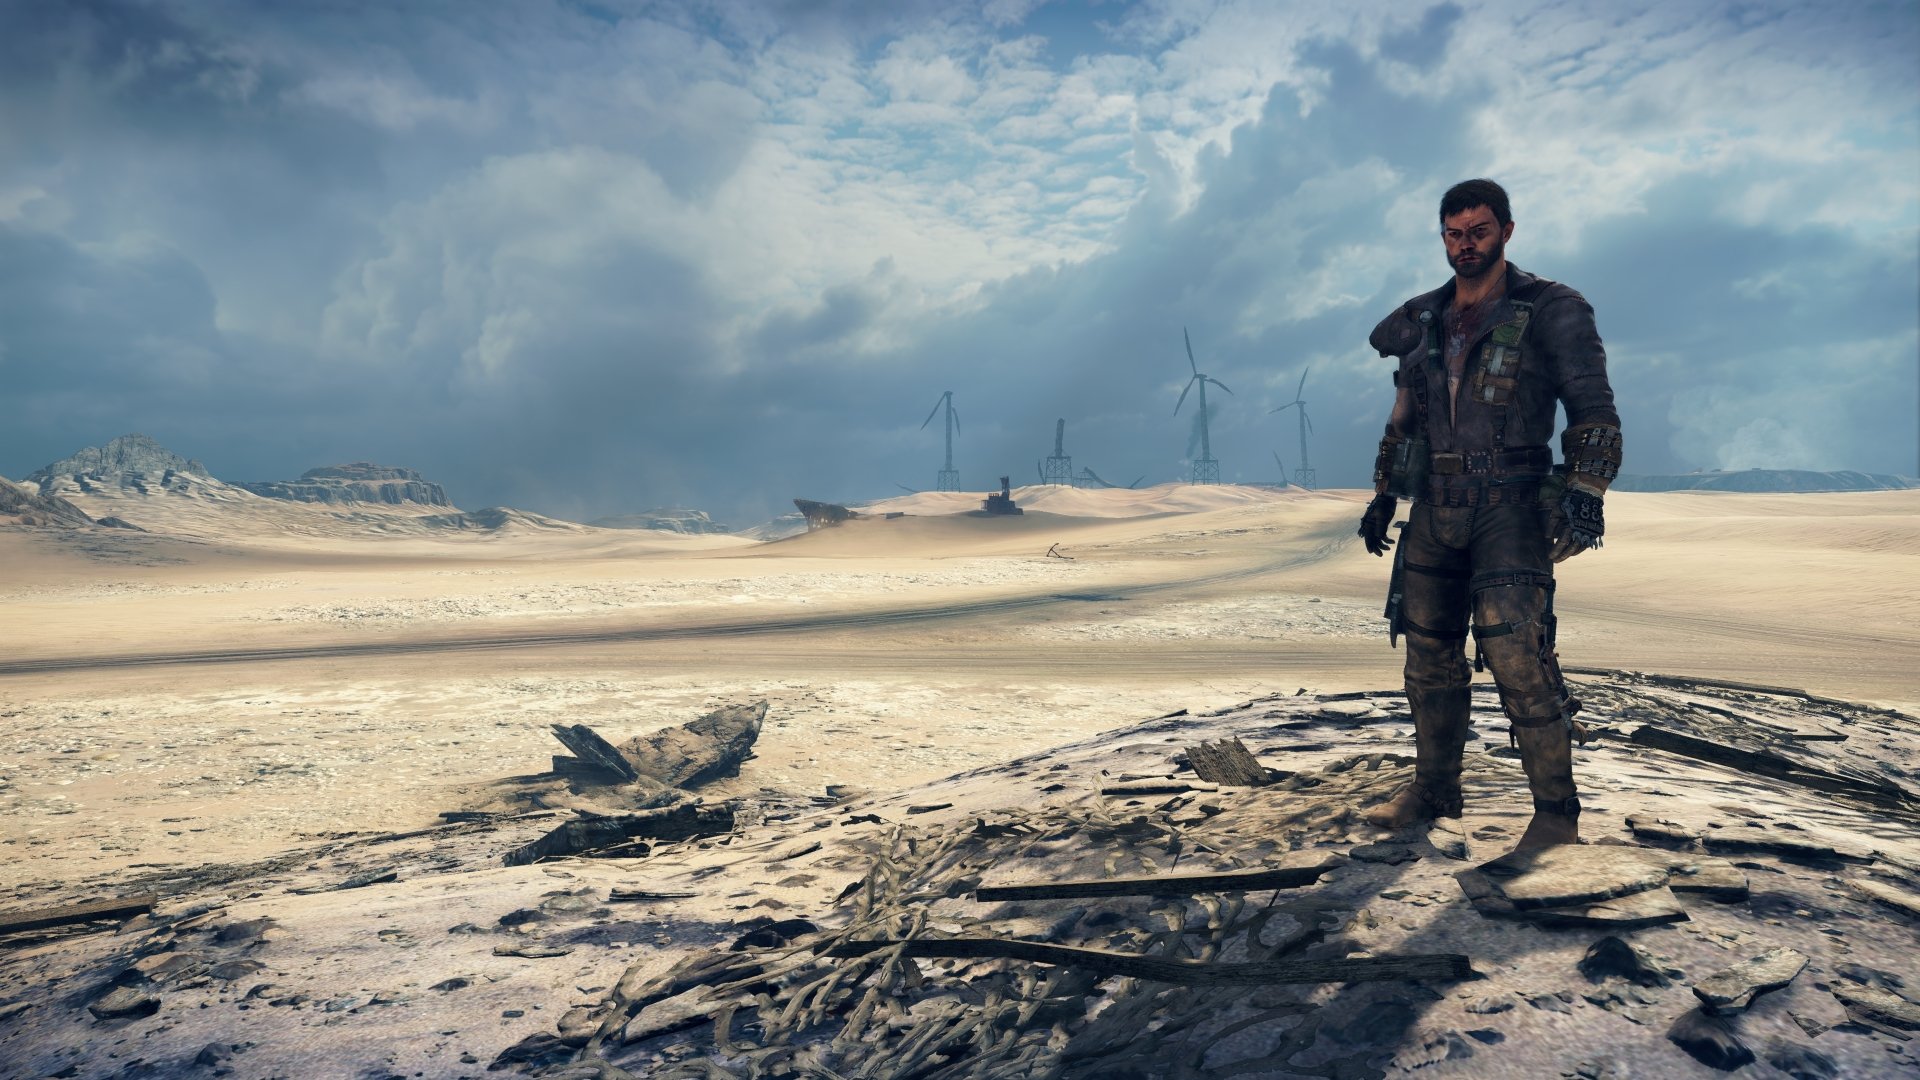 PC Gaming Video Games Mad Max Game Desert Apocalyptic Car Mad Max Screen Shot 1920x1080